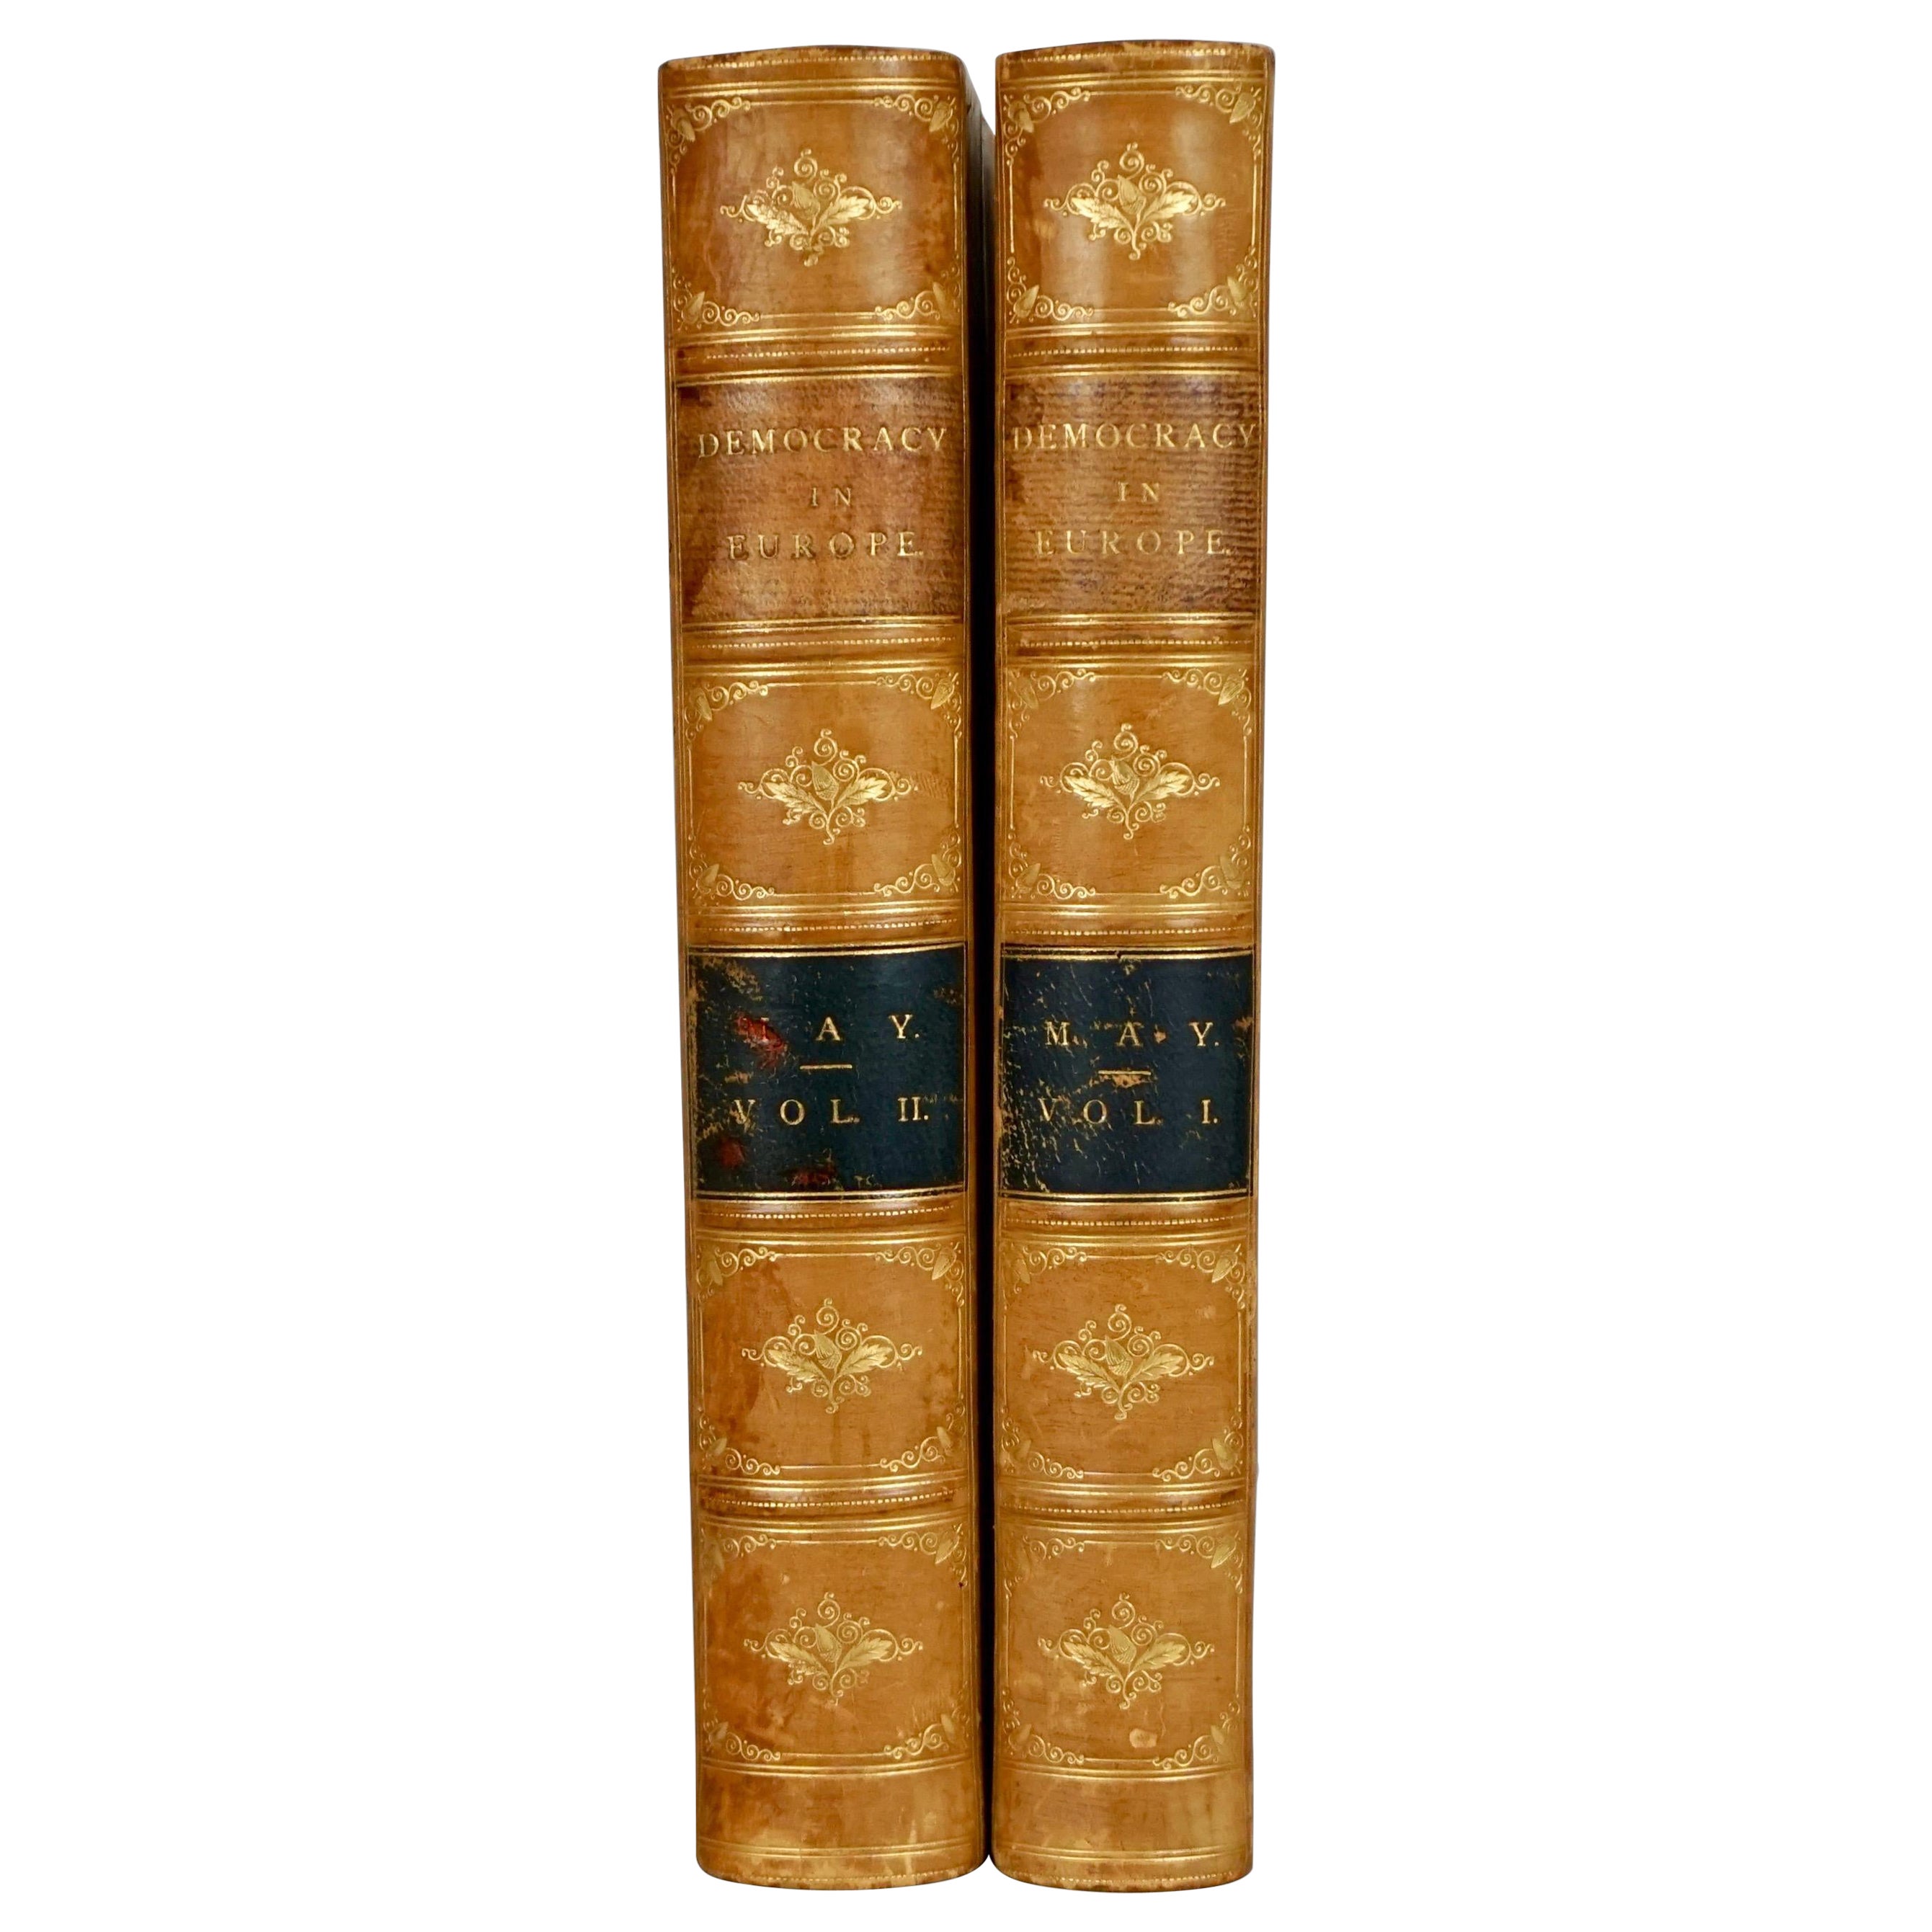 Democracy in Europe by Sir Thomas May Published New York 1878 in 2 Volumes